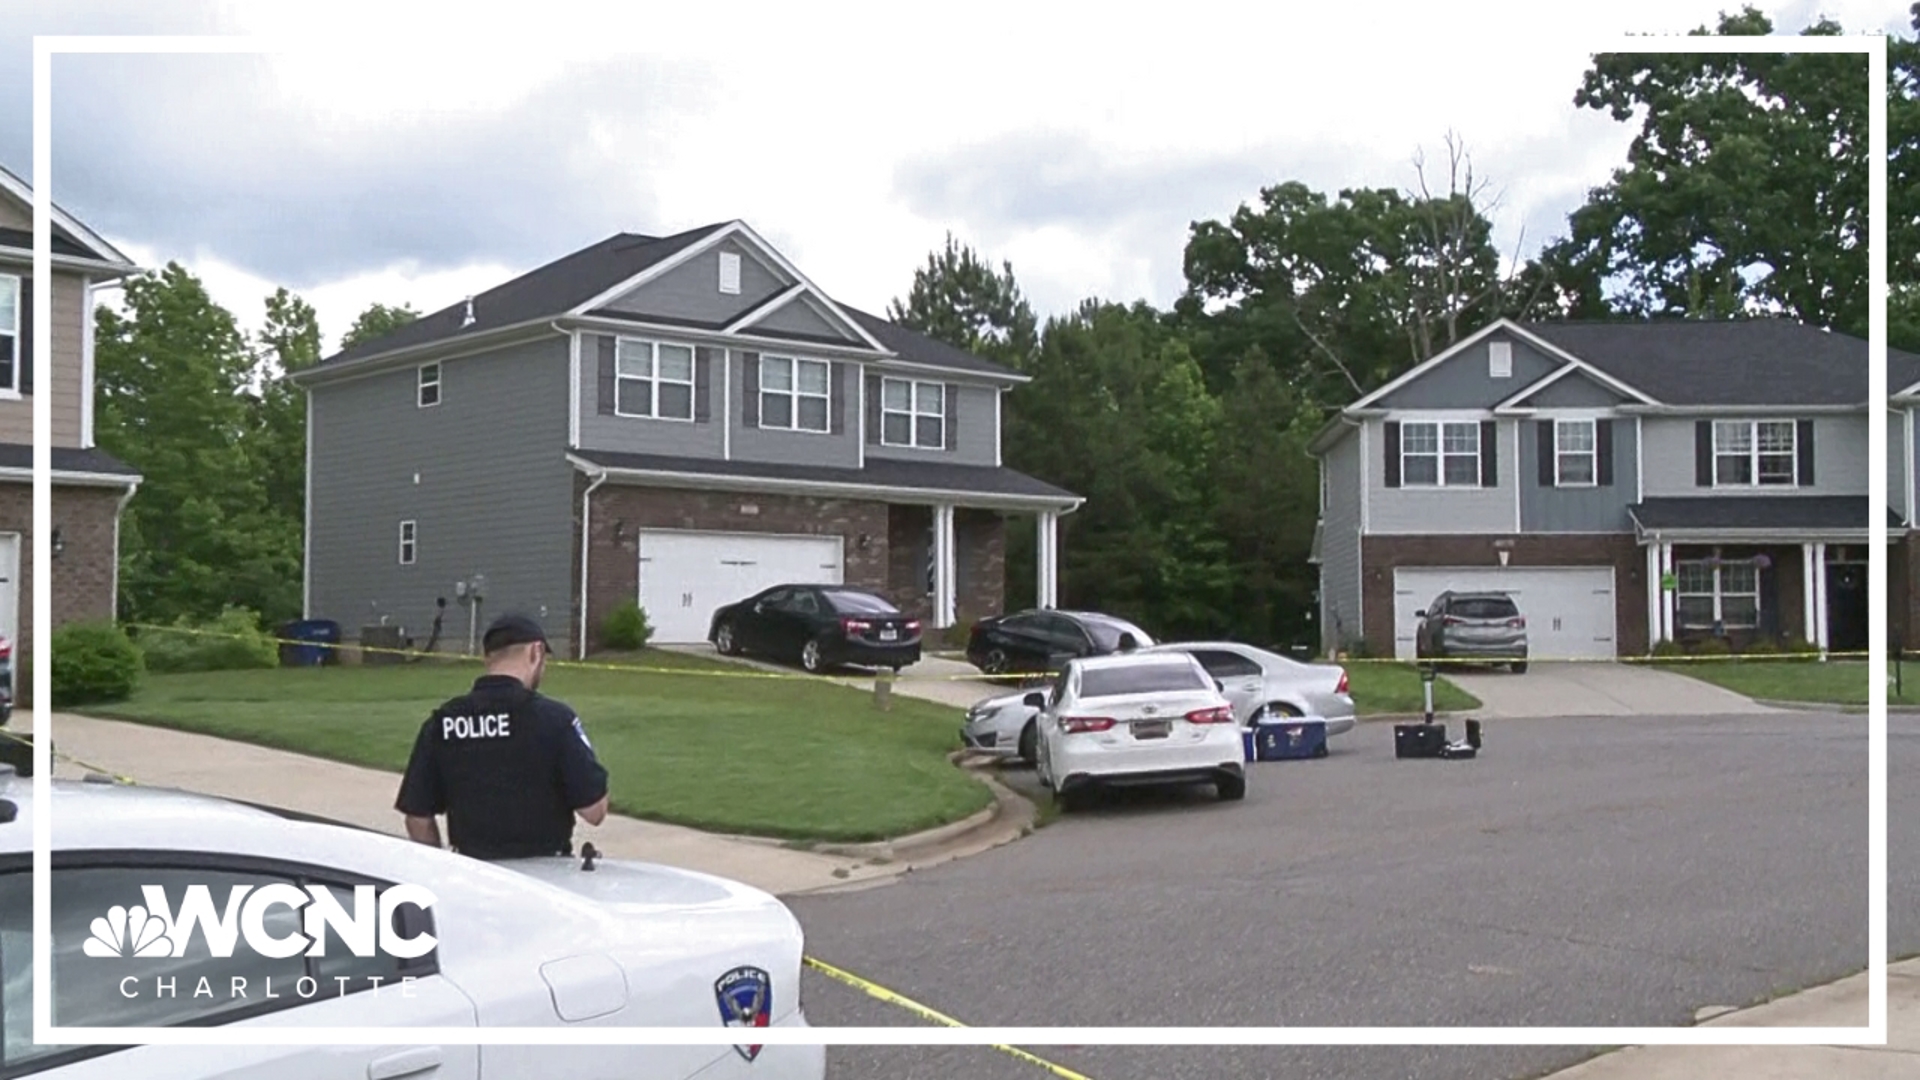 When officers arrived, they found three people dead inside the house.